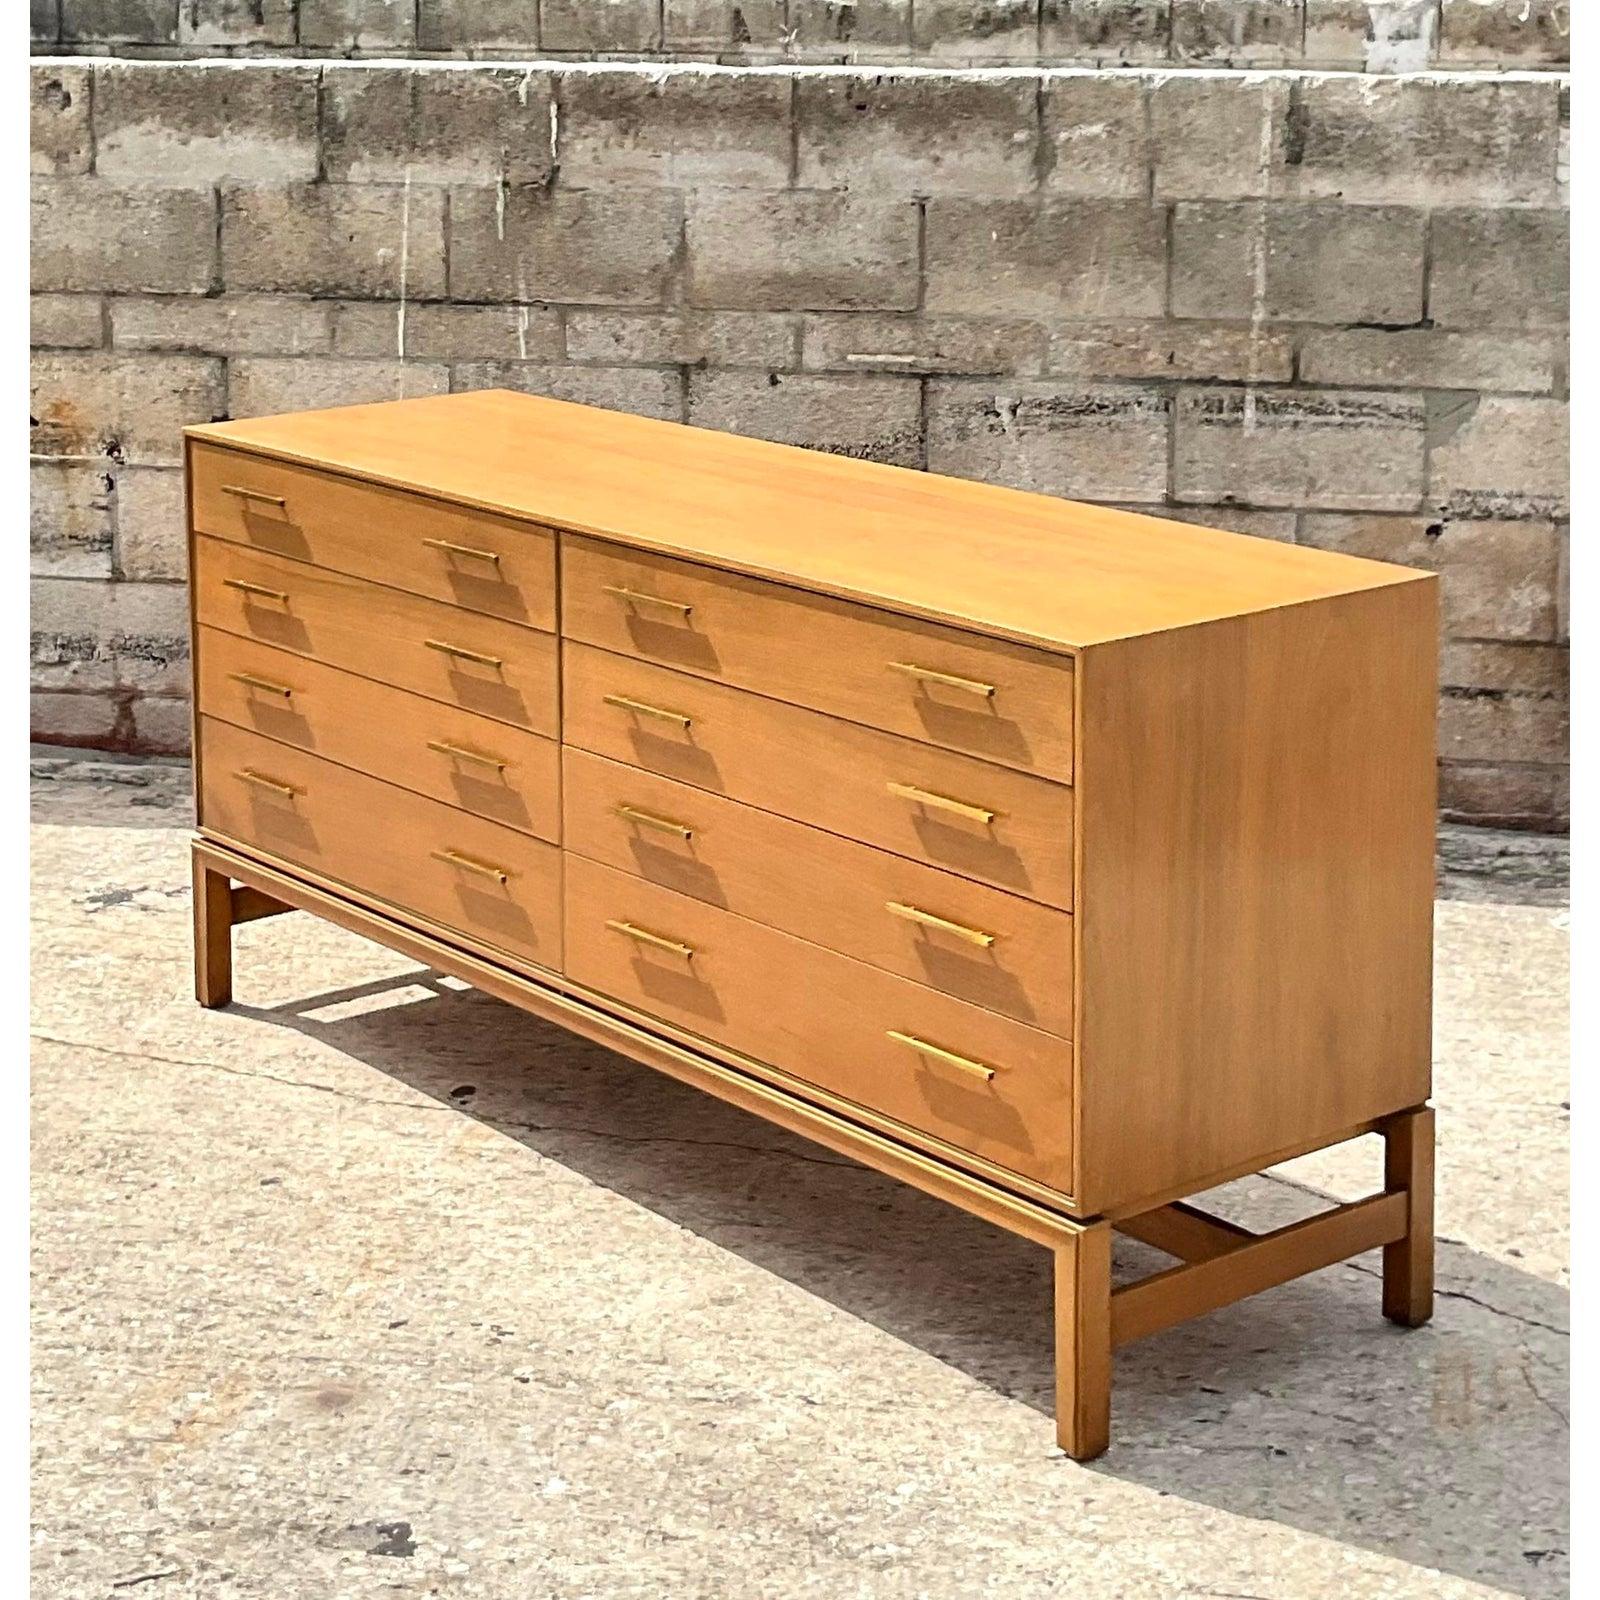 Fantastic midcentury 8 drawer dresser. Made by the iconic Johnson Brothers in the US. They were the makers of some of the most prestigious MCM designers collections in history. Beautiful mole cabinet with chic brass trim and hardware. Acquired from